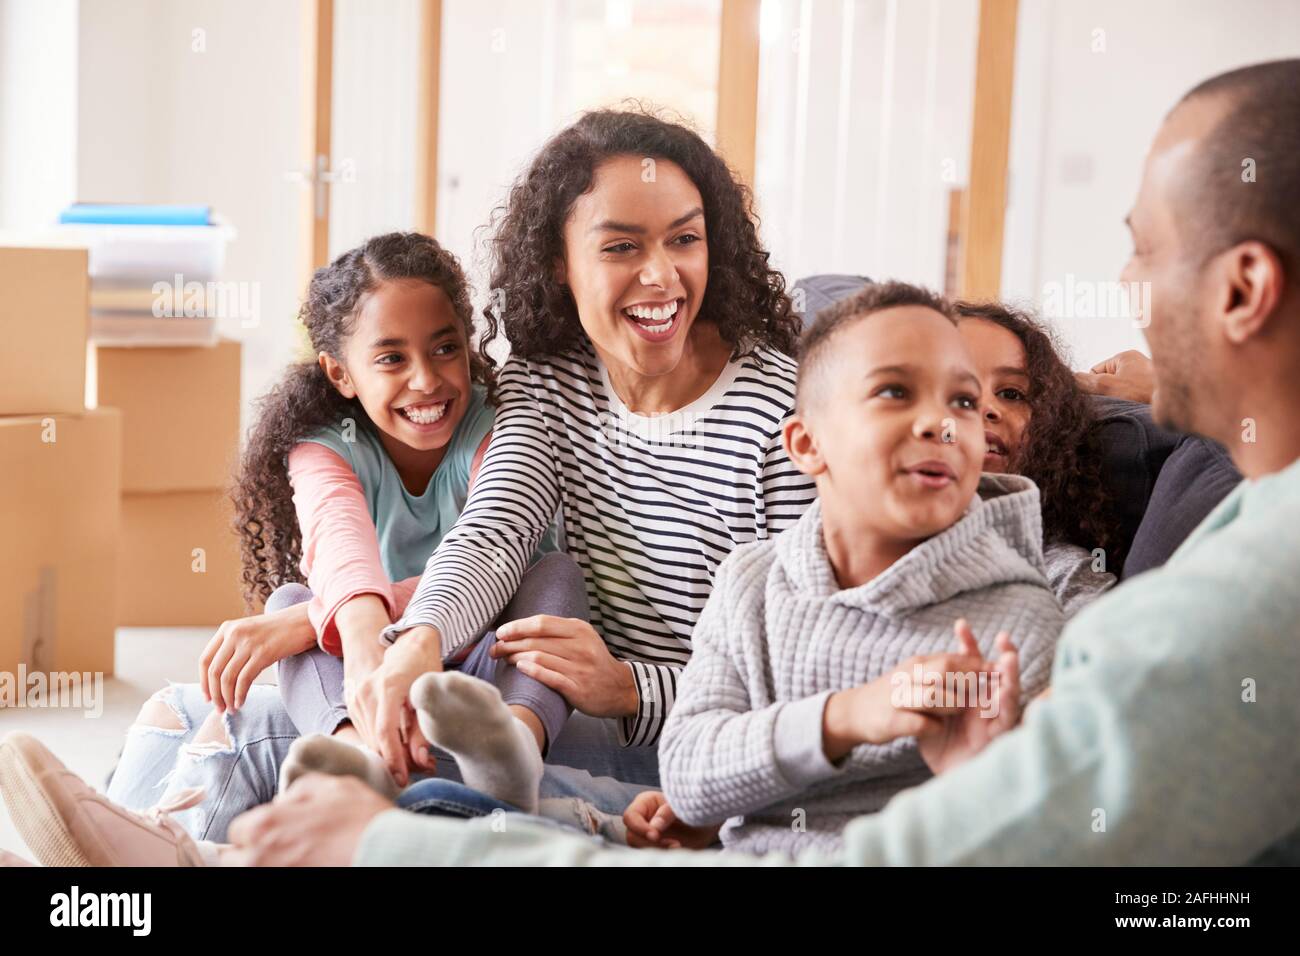 Family Taking A Break And Sitting On Sofa Celebrating Moving Into New Home Together Stock Photo